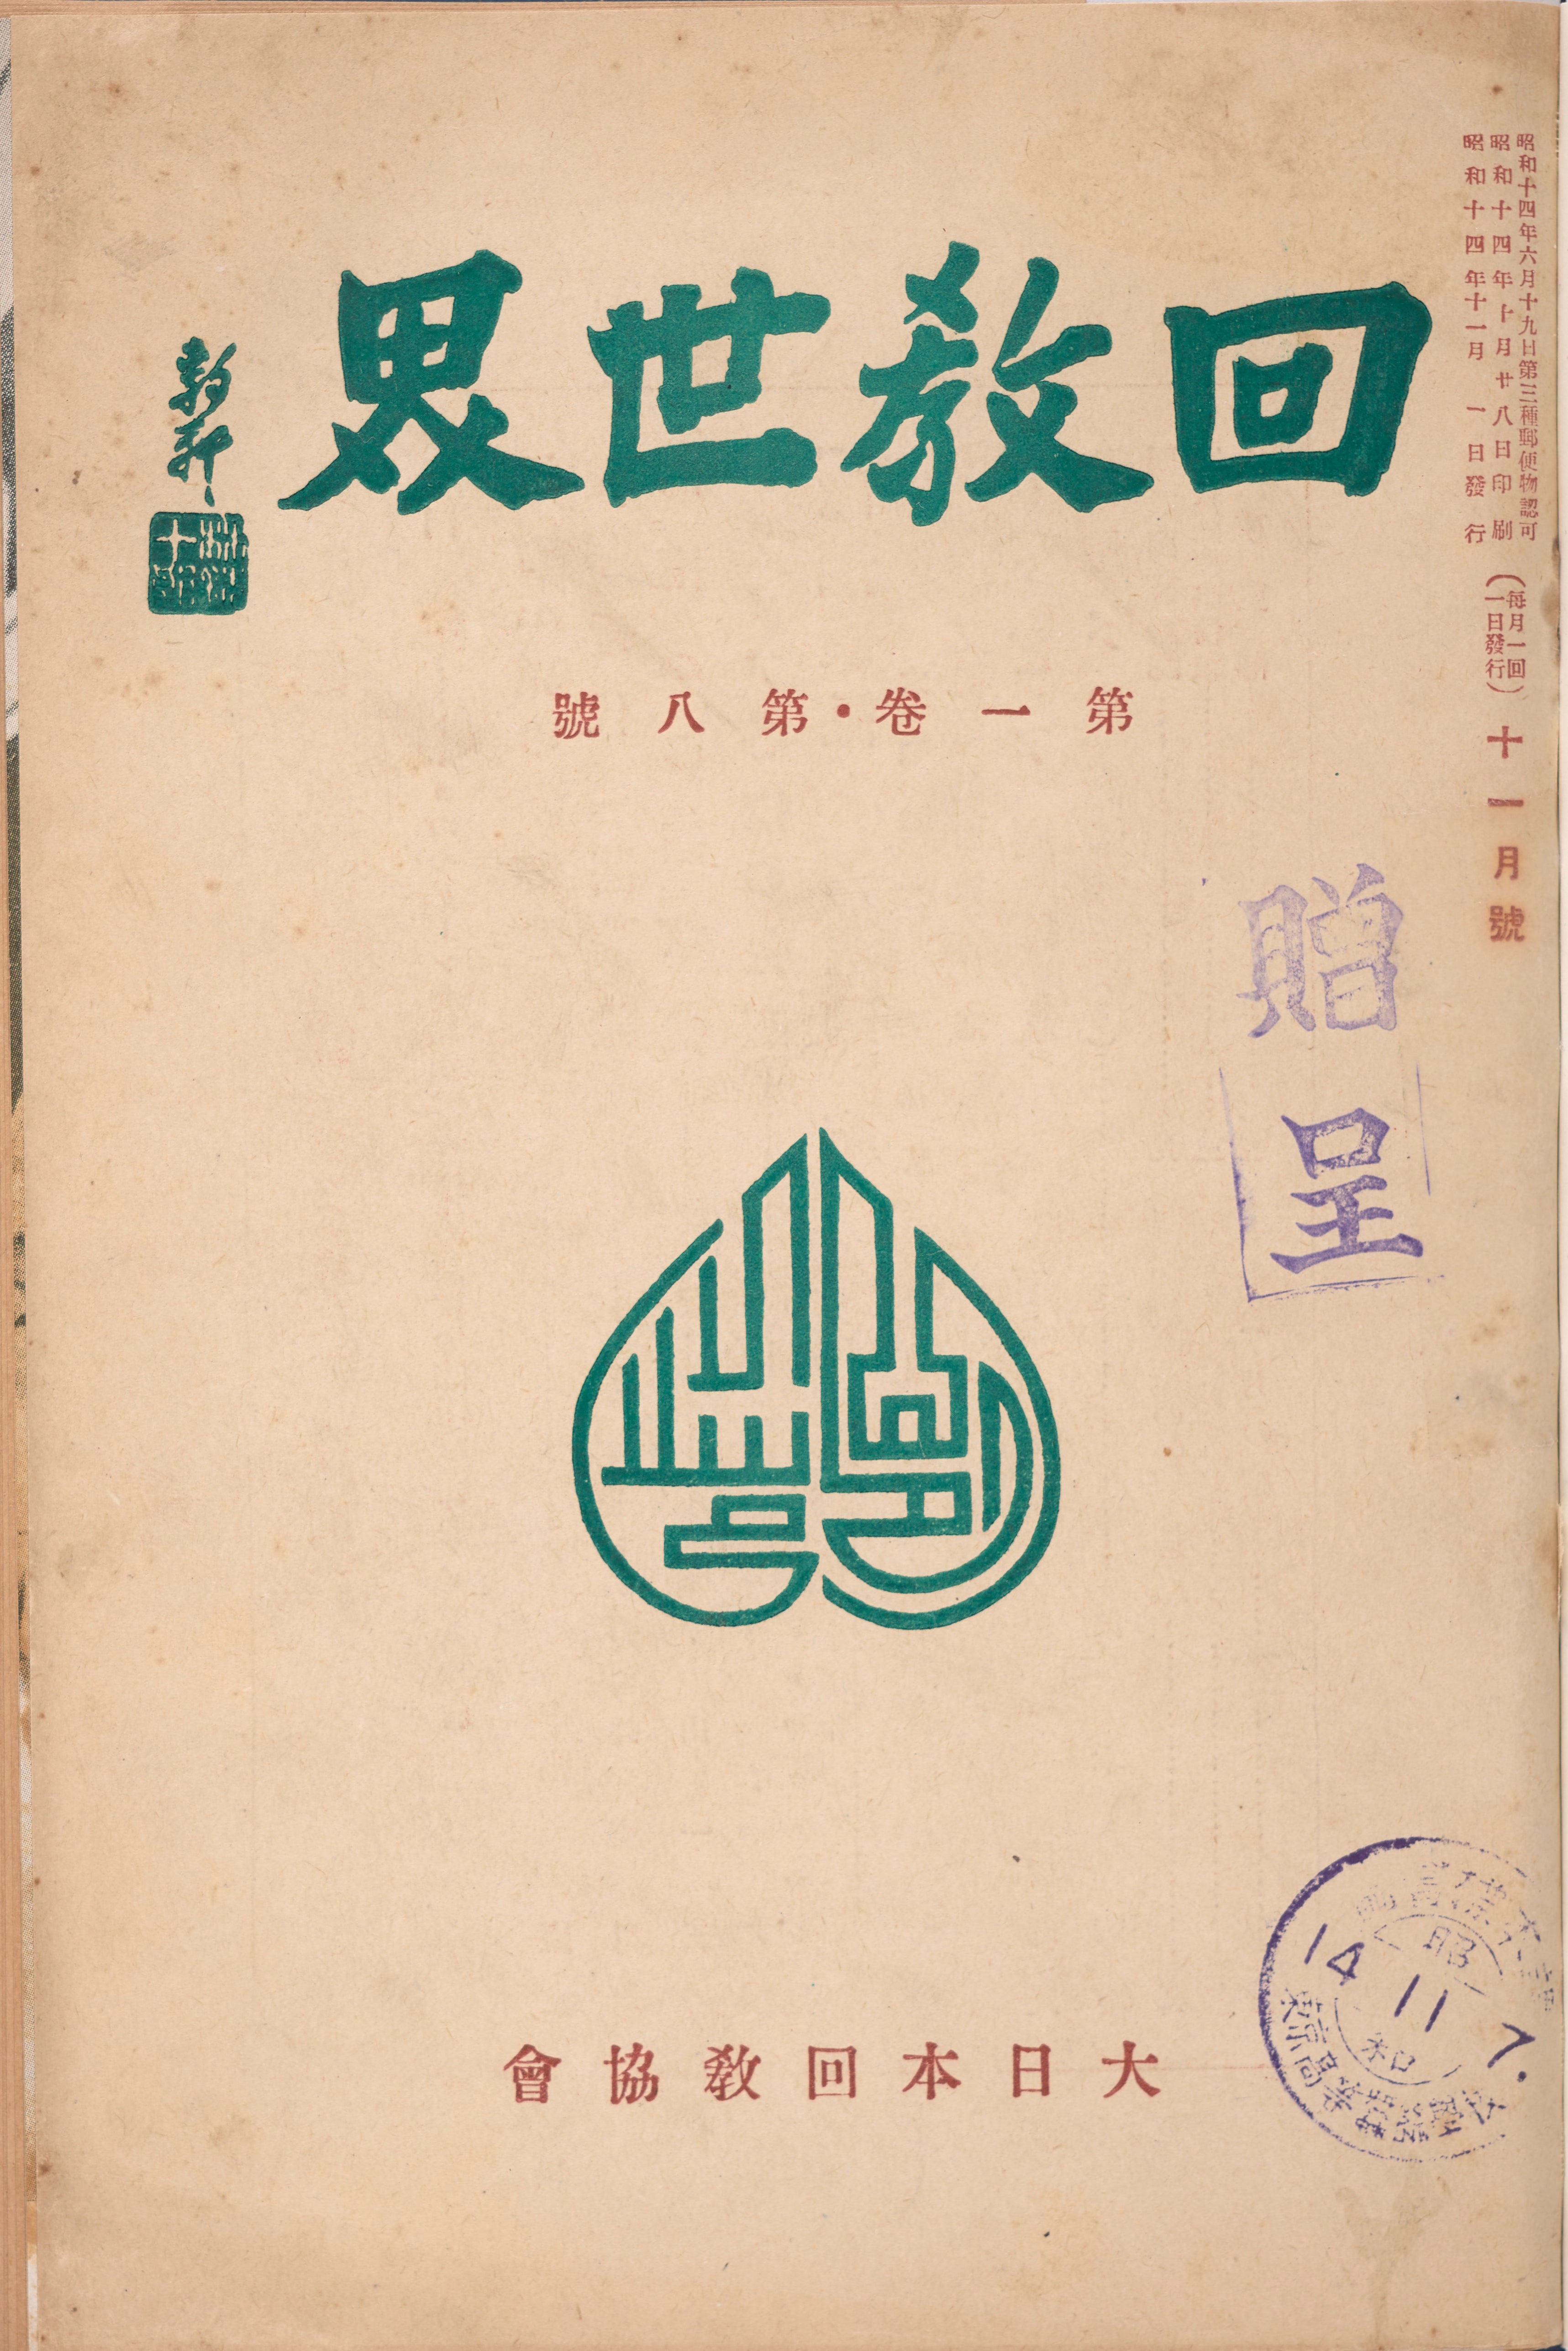 A worn, beige-colored book cover shows bold green Japanese text indicating a title over a prominent green emblem with intricate designs inside. Smaller red text as well as two faded purple stamps also adorn the page.